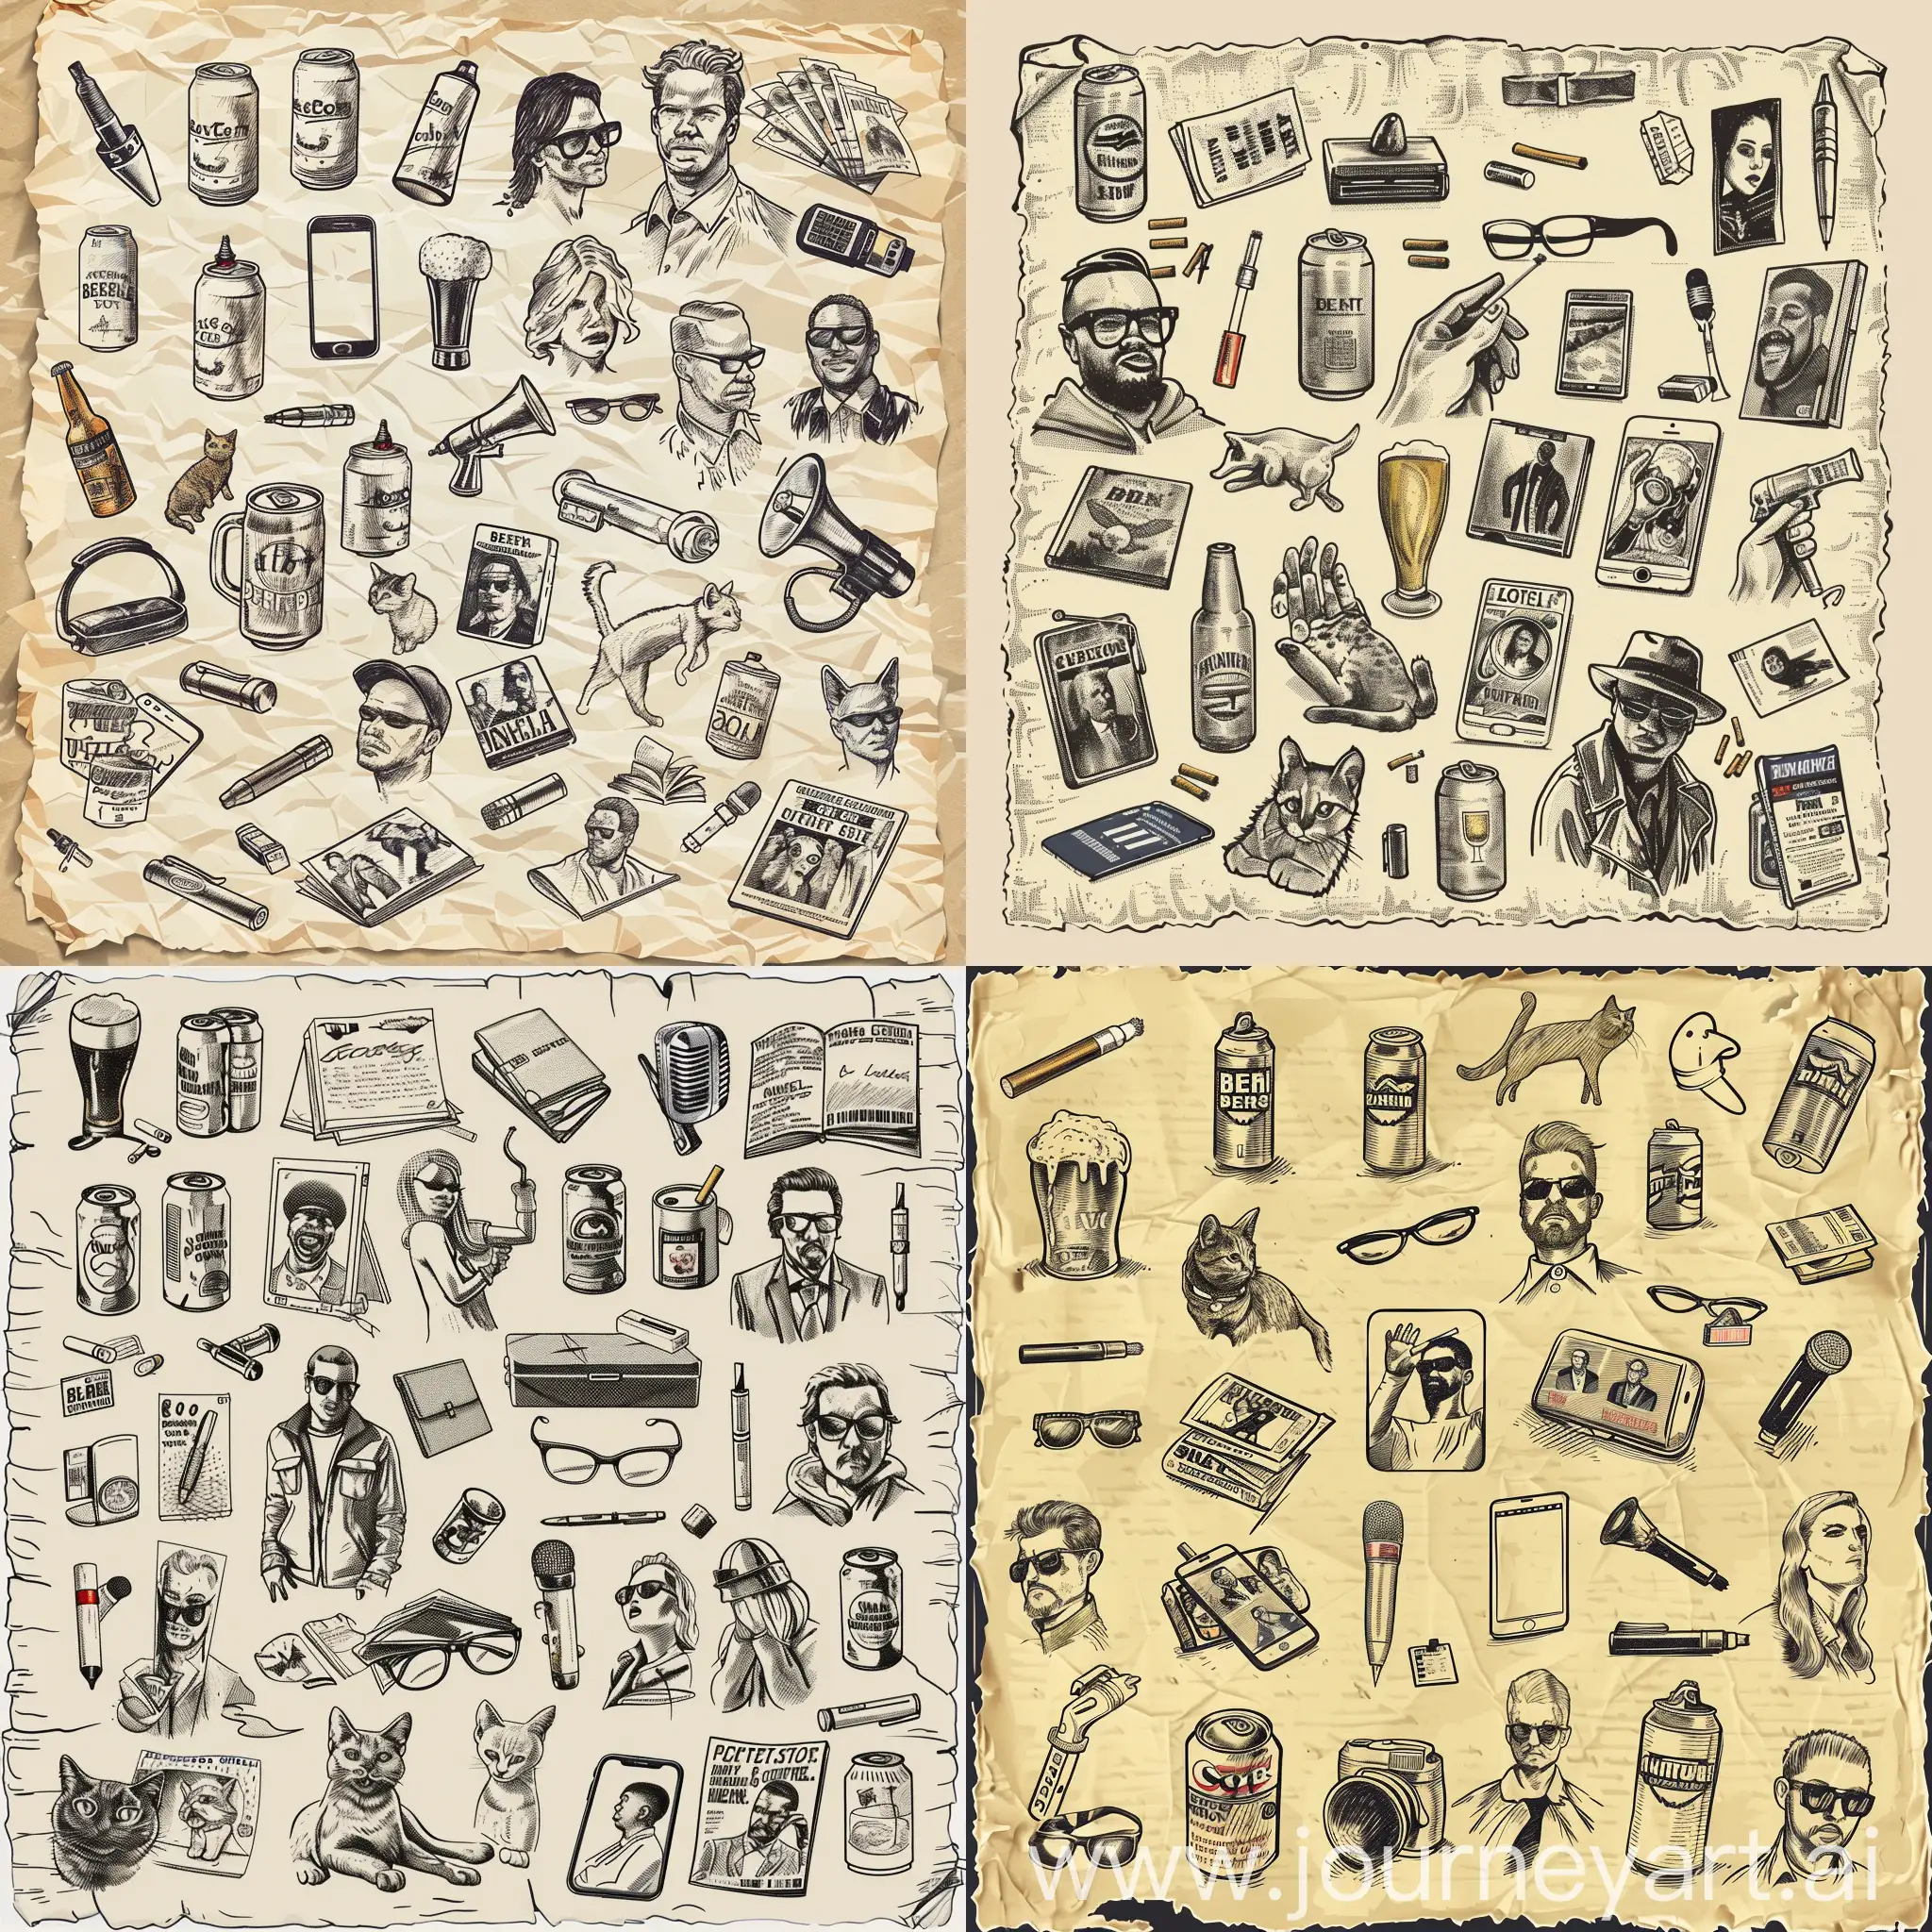 fullscreen of a sheet of paper with drawings on it - stylized as if they were hand-drawn and small in size: beer cans, smartphone, lighter and cigarettes, glasses, pen, magazines, cat, model, rapper, microphone, politician, businessman